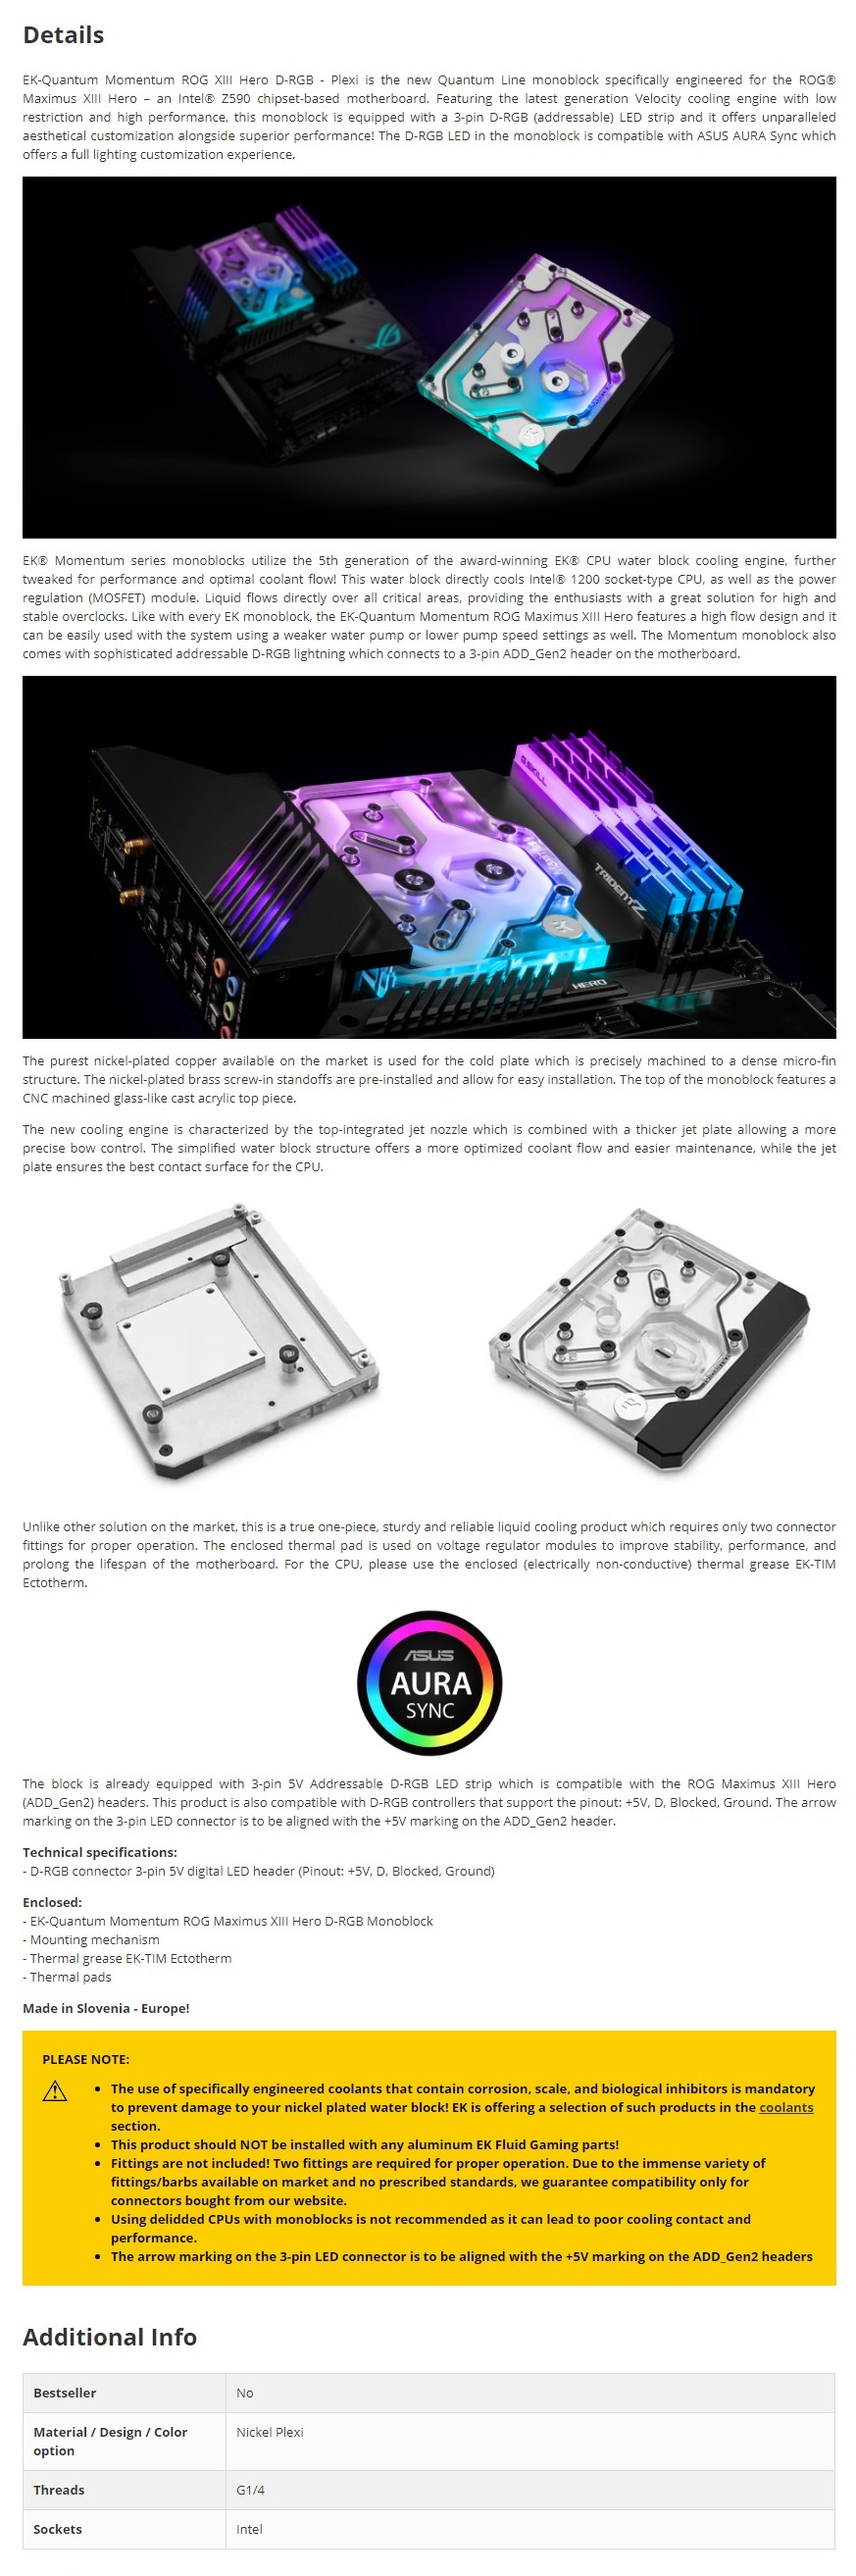 A large marketing image providing additional information about the product EK Quantum Momentum ROG Maximus XIII Hero D-RGB - Plexi - Additional alt info not provided